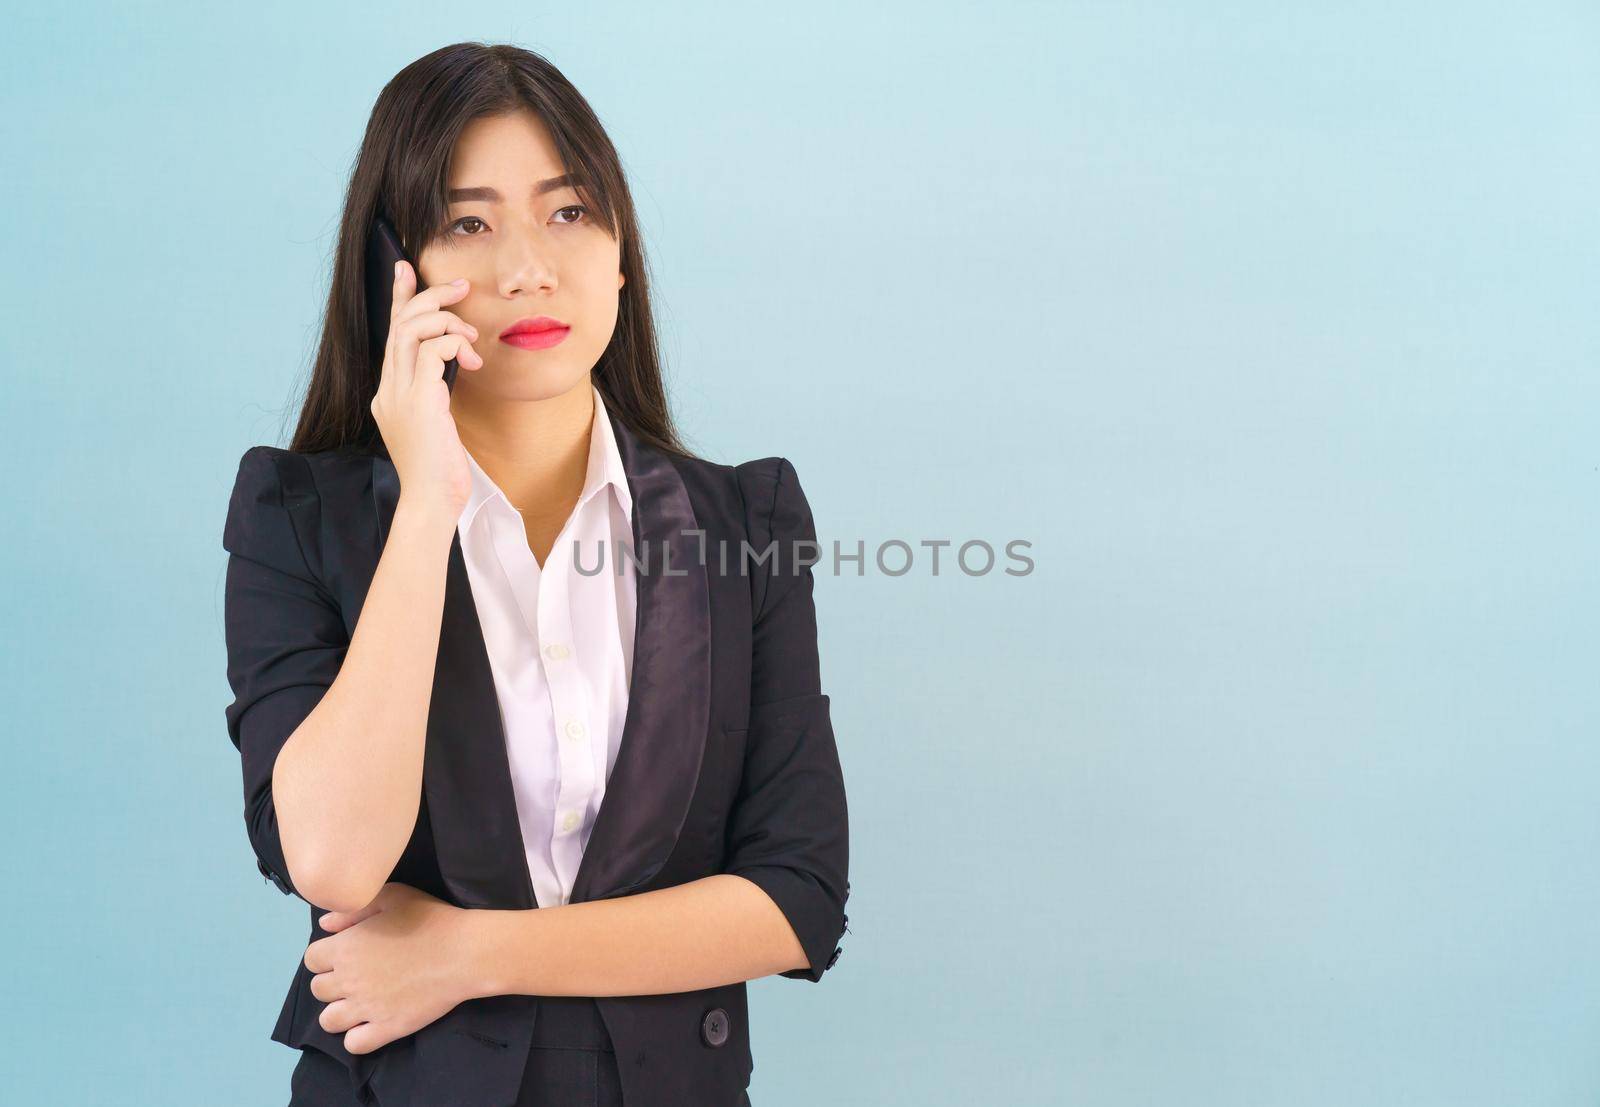 Young Asian women in suit standing posing using her phone against blue background